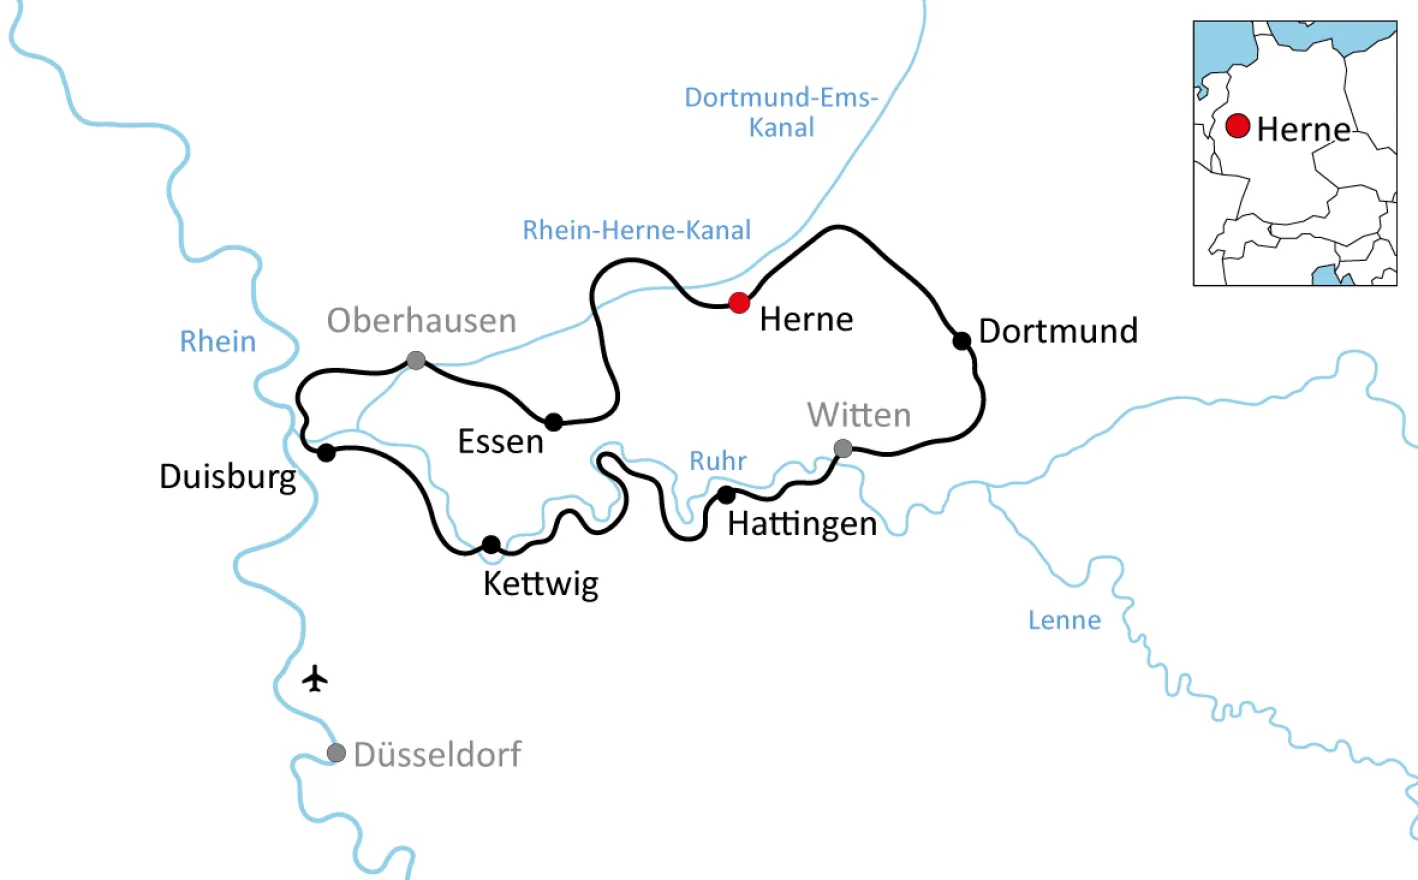 Map for the bike tour through the Ruhr area